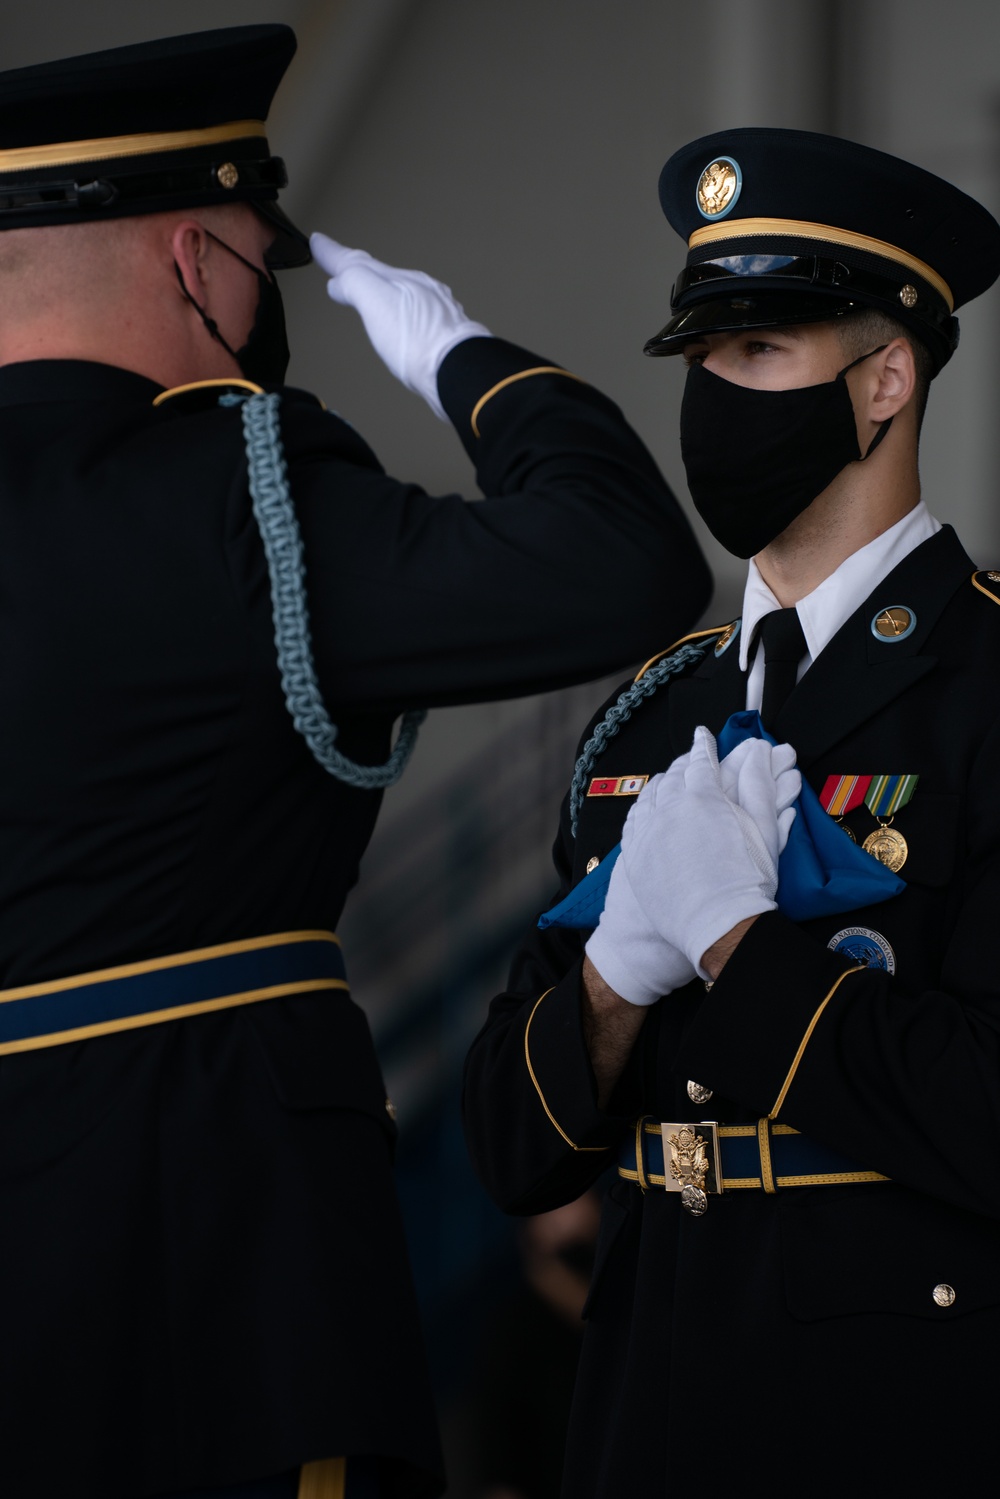 United States Returns 147 Sets of Remains to South Korea Days Before the 70th Anniversary of the Start of the Korean War